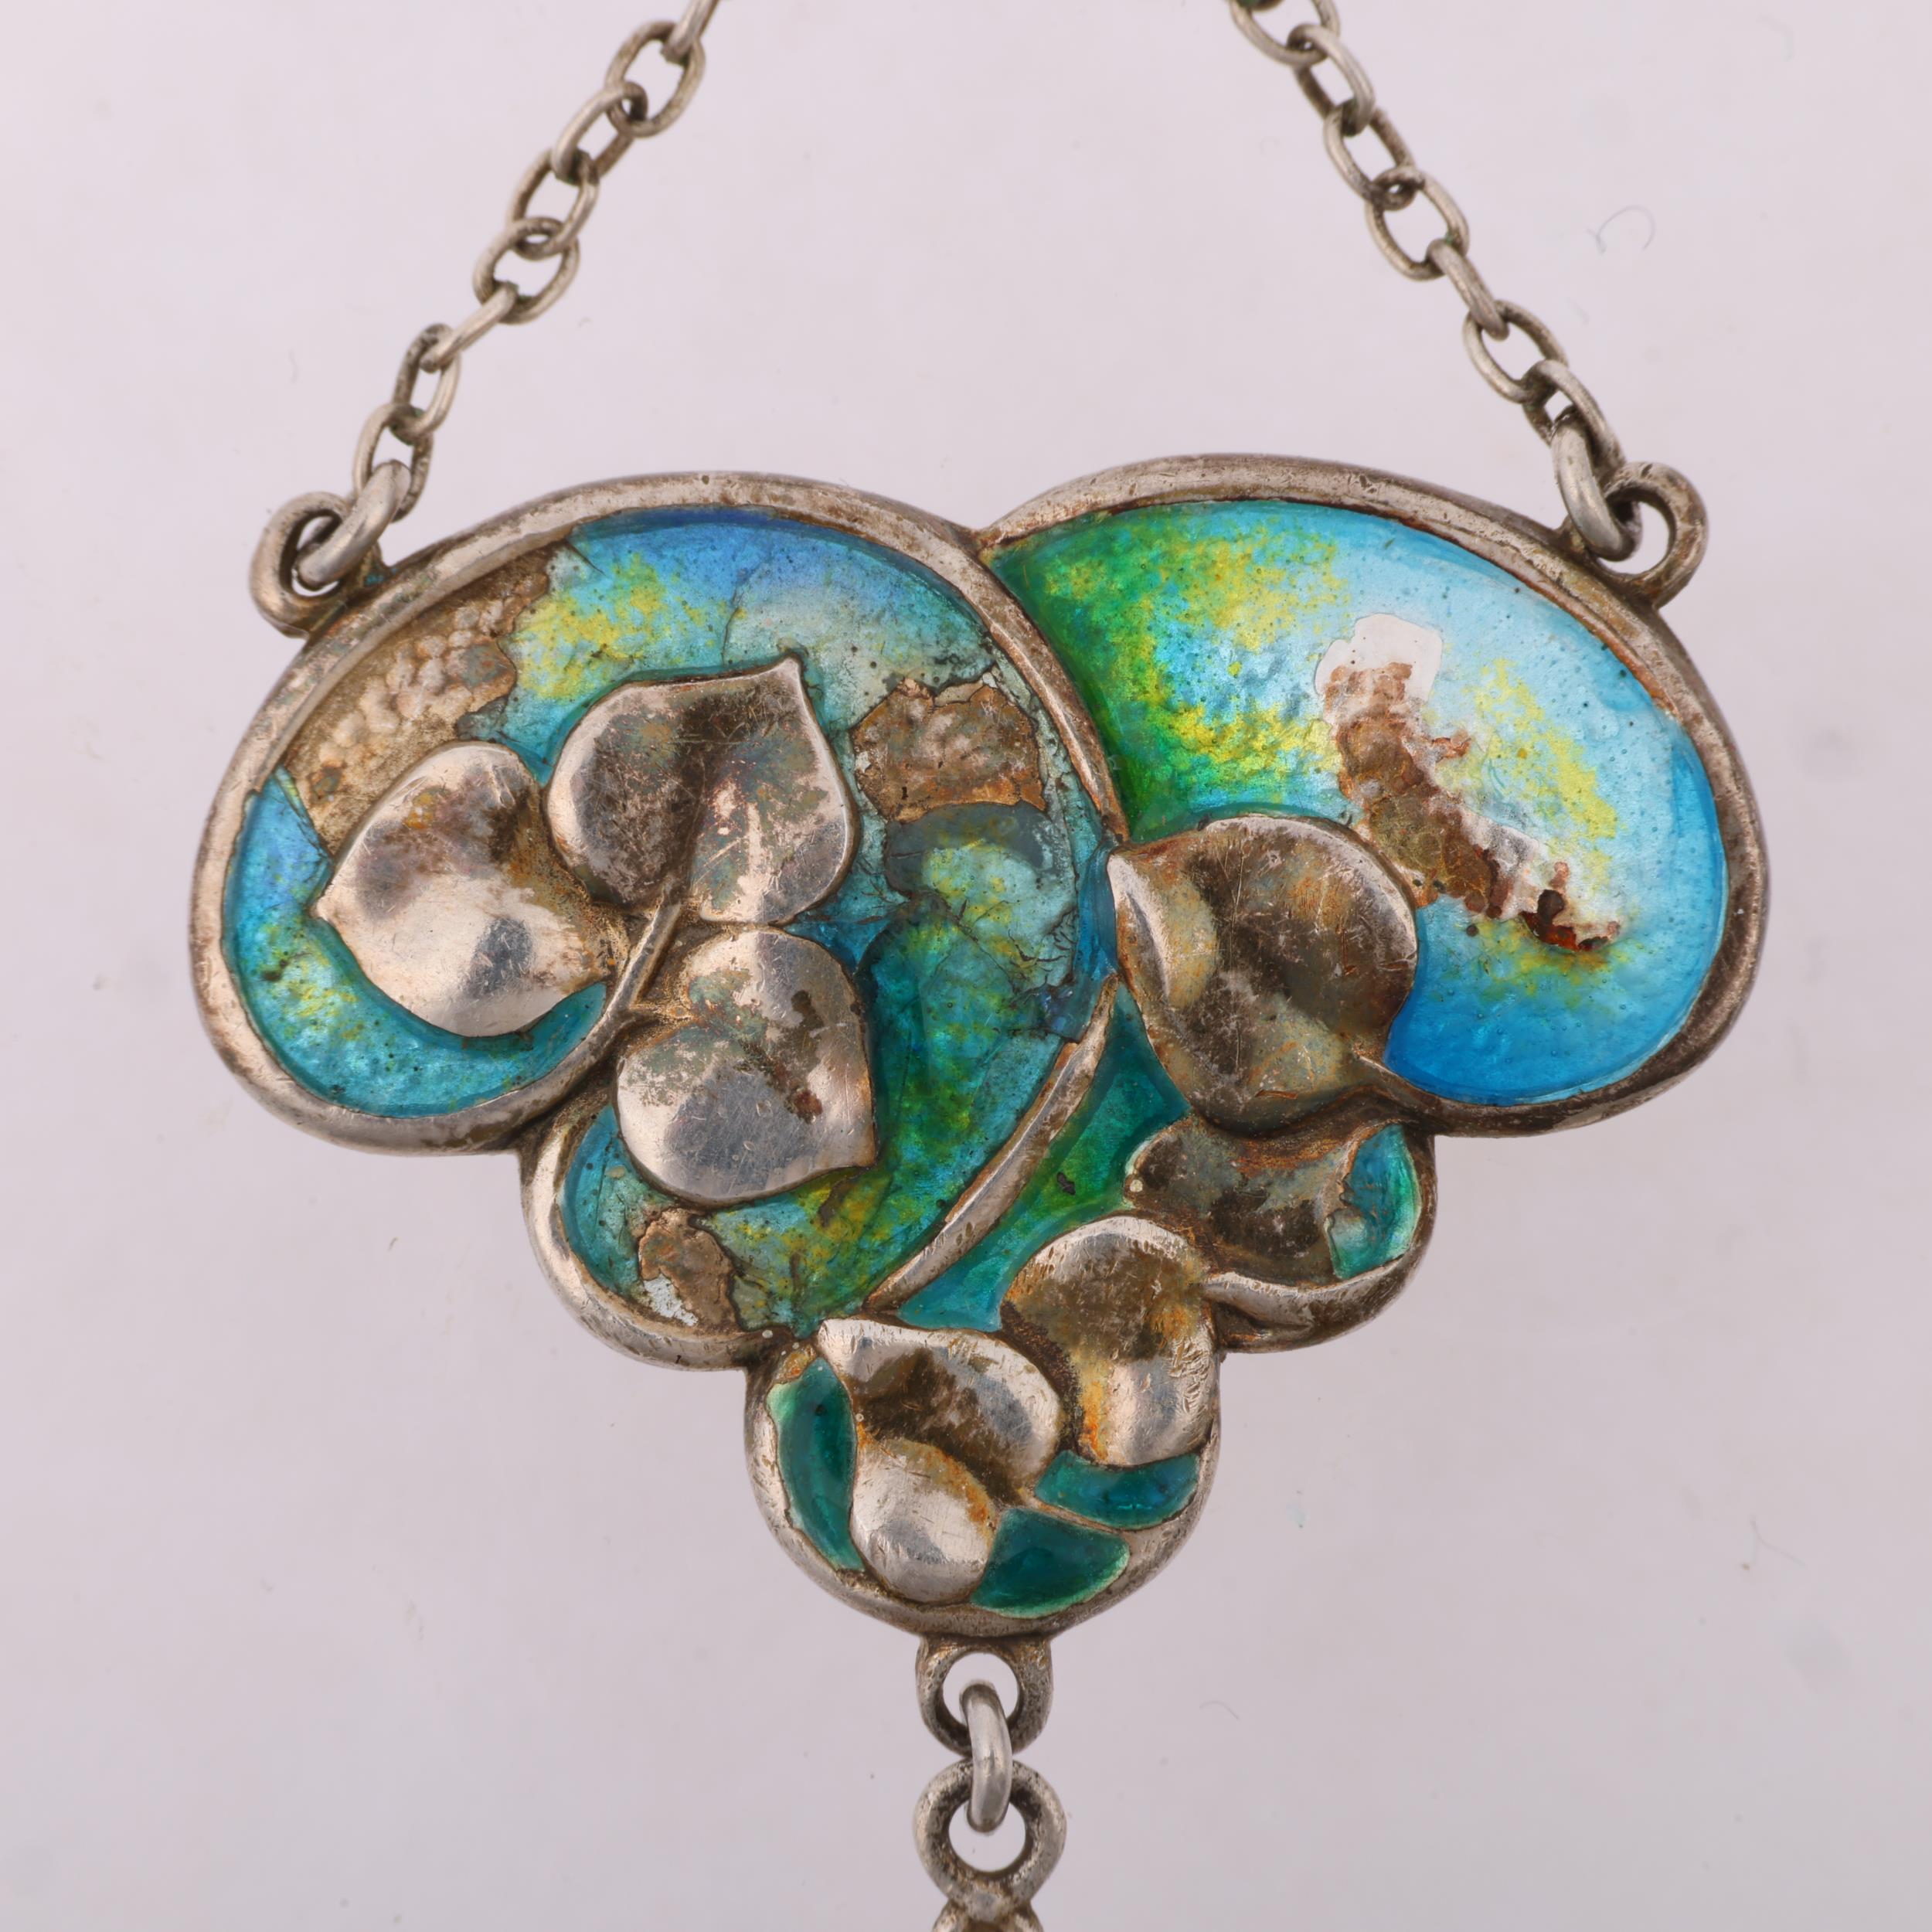 CHARLES HORNER - an Art Nouveau silver and peacock enamel floral lavalier pendant, maker CH, - Image 2 of 3